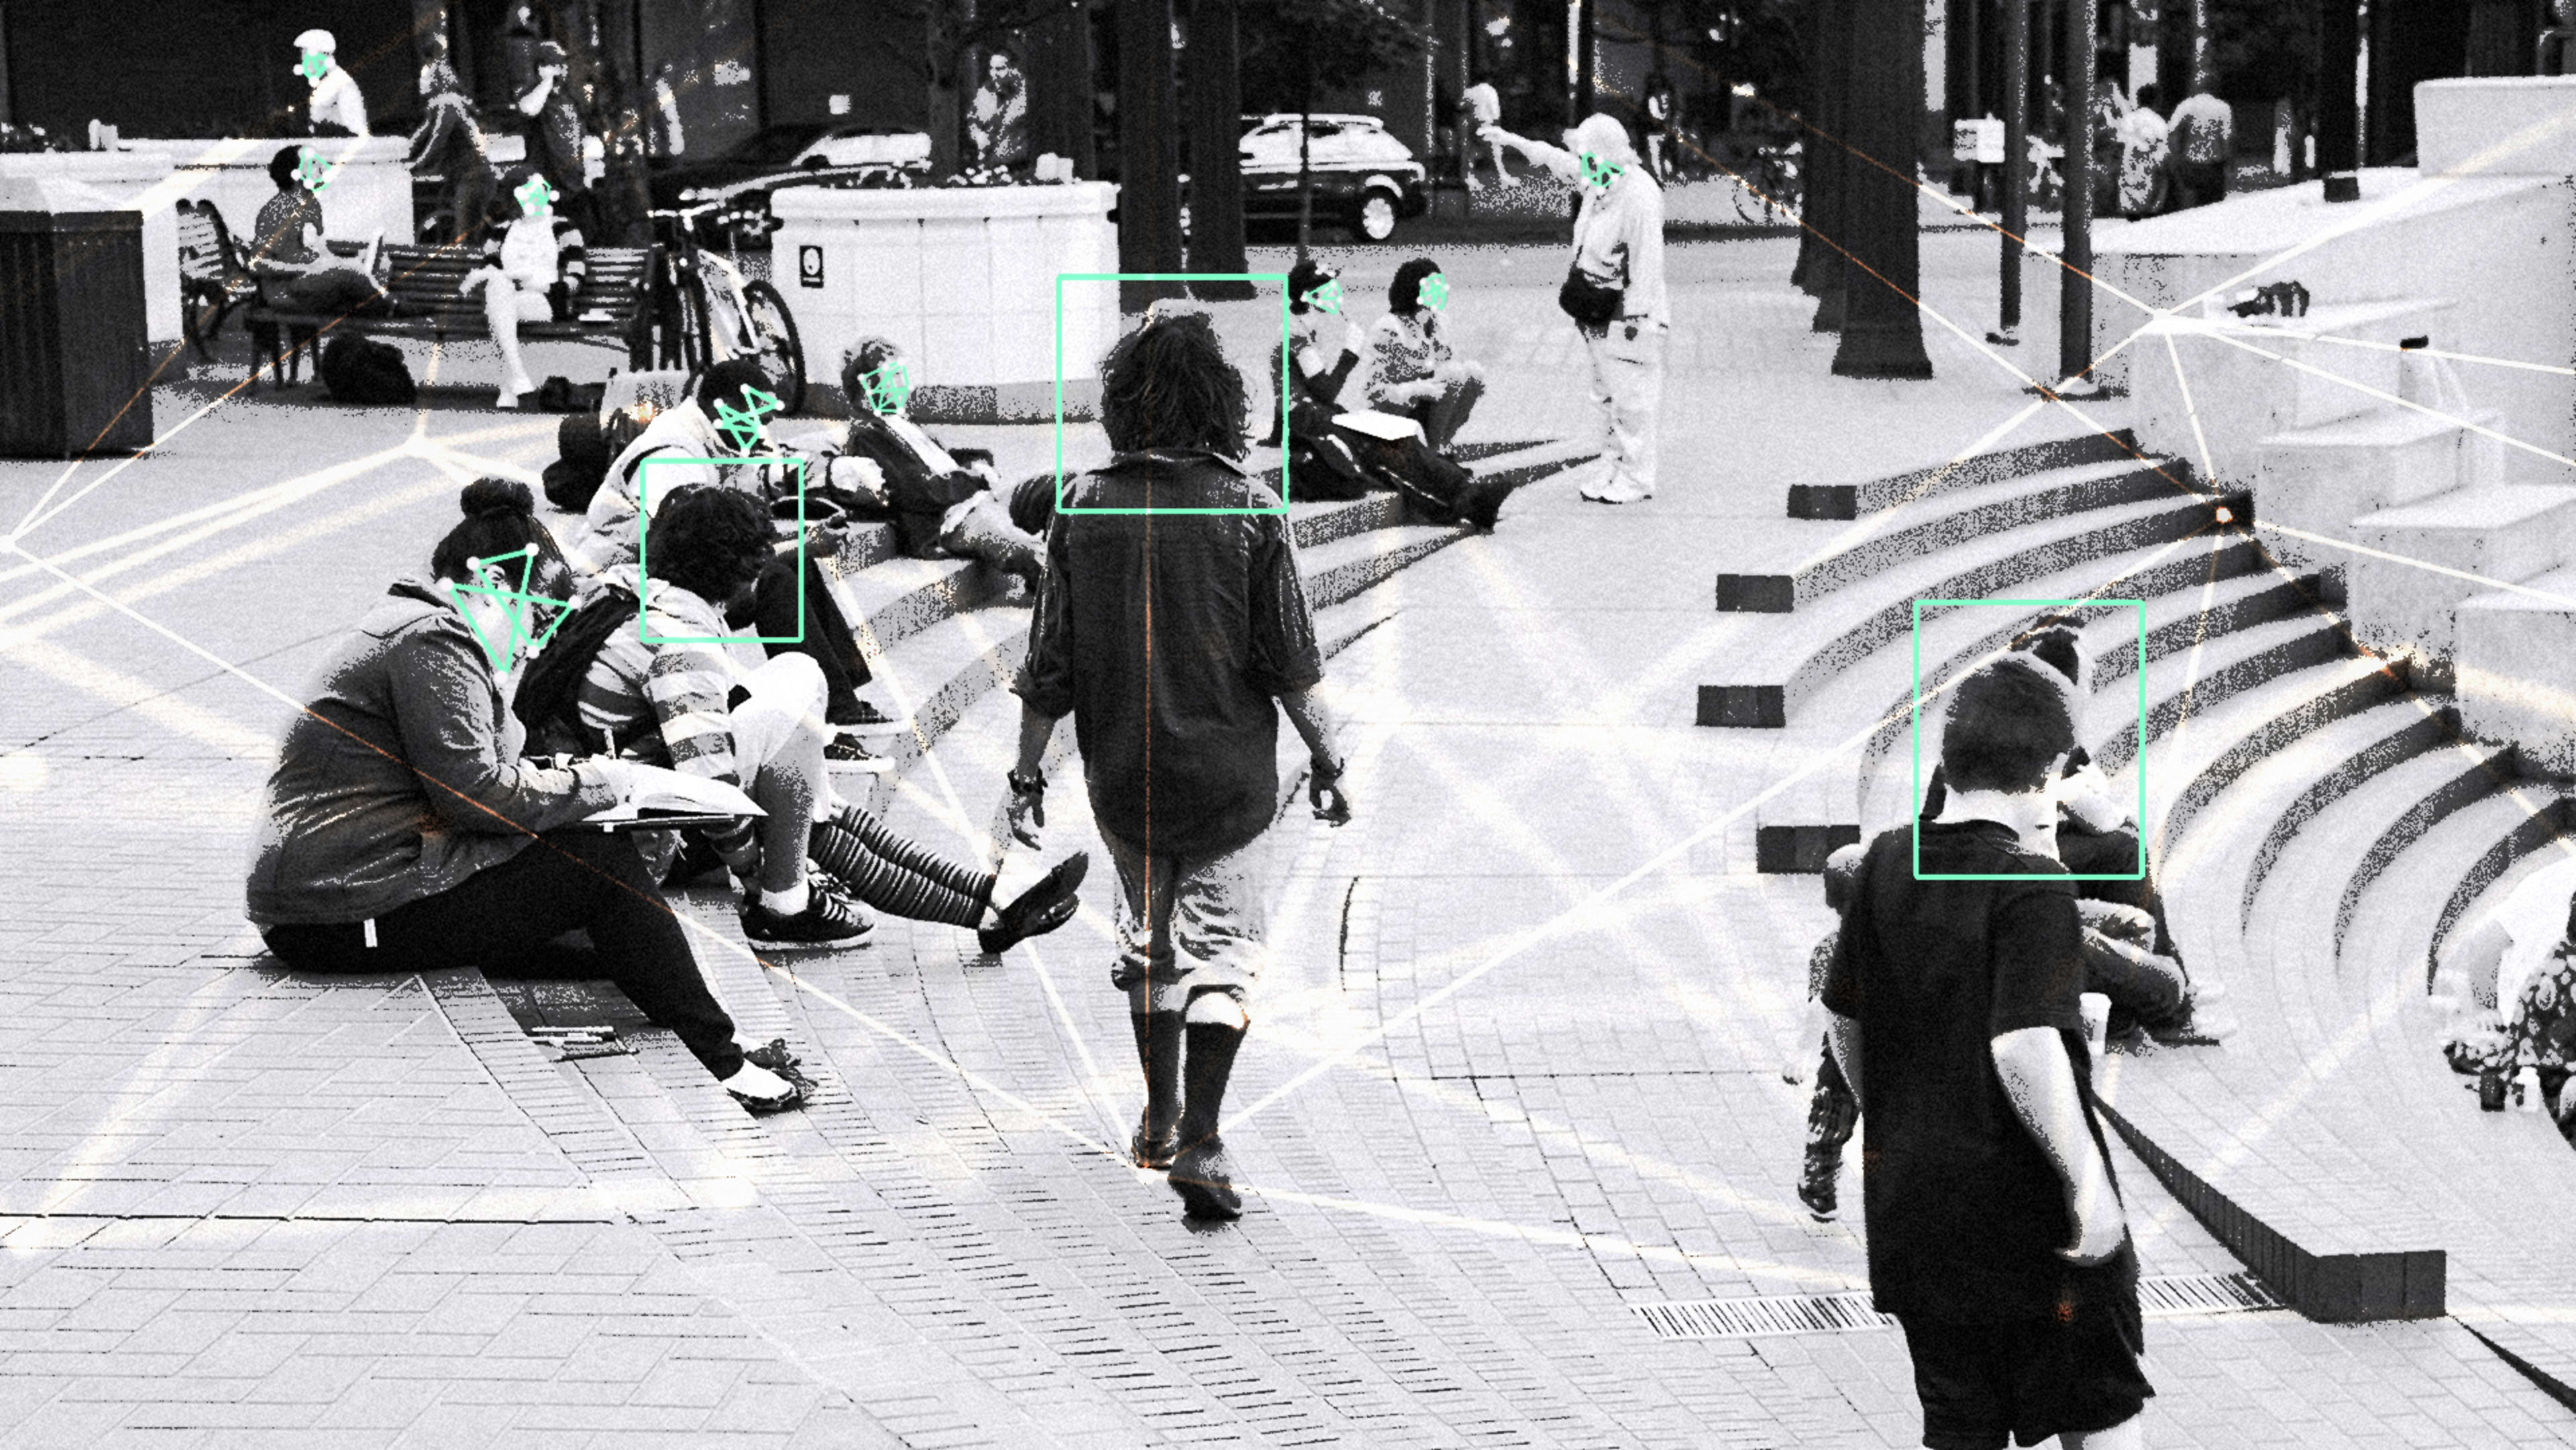 Portland plans to propose the strictest facial recognition ban in the country